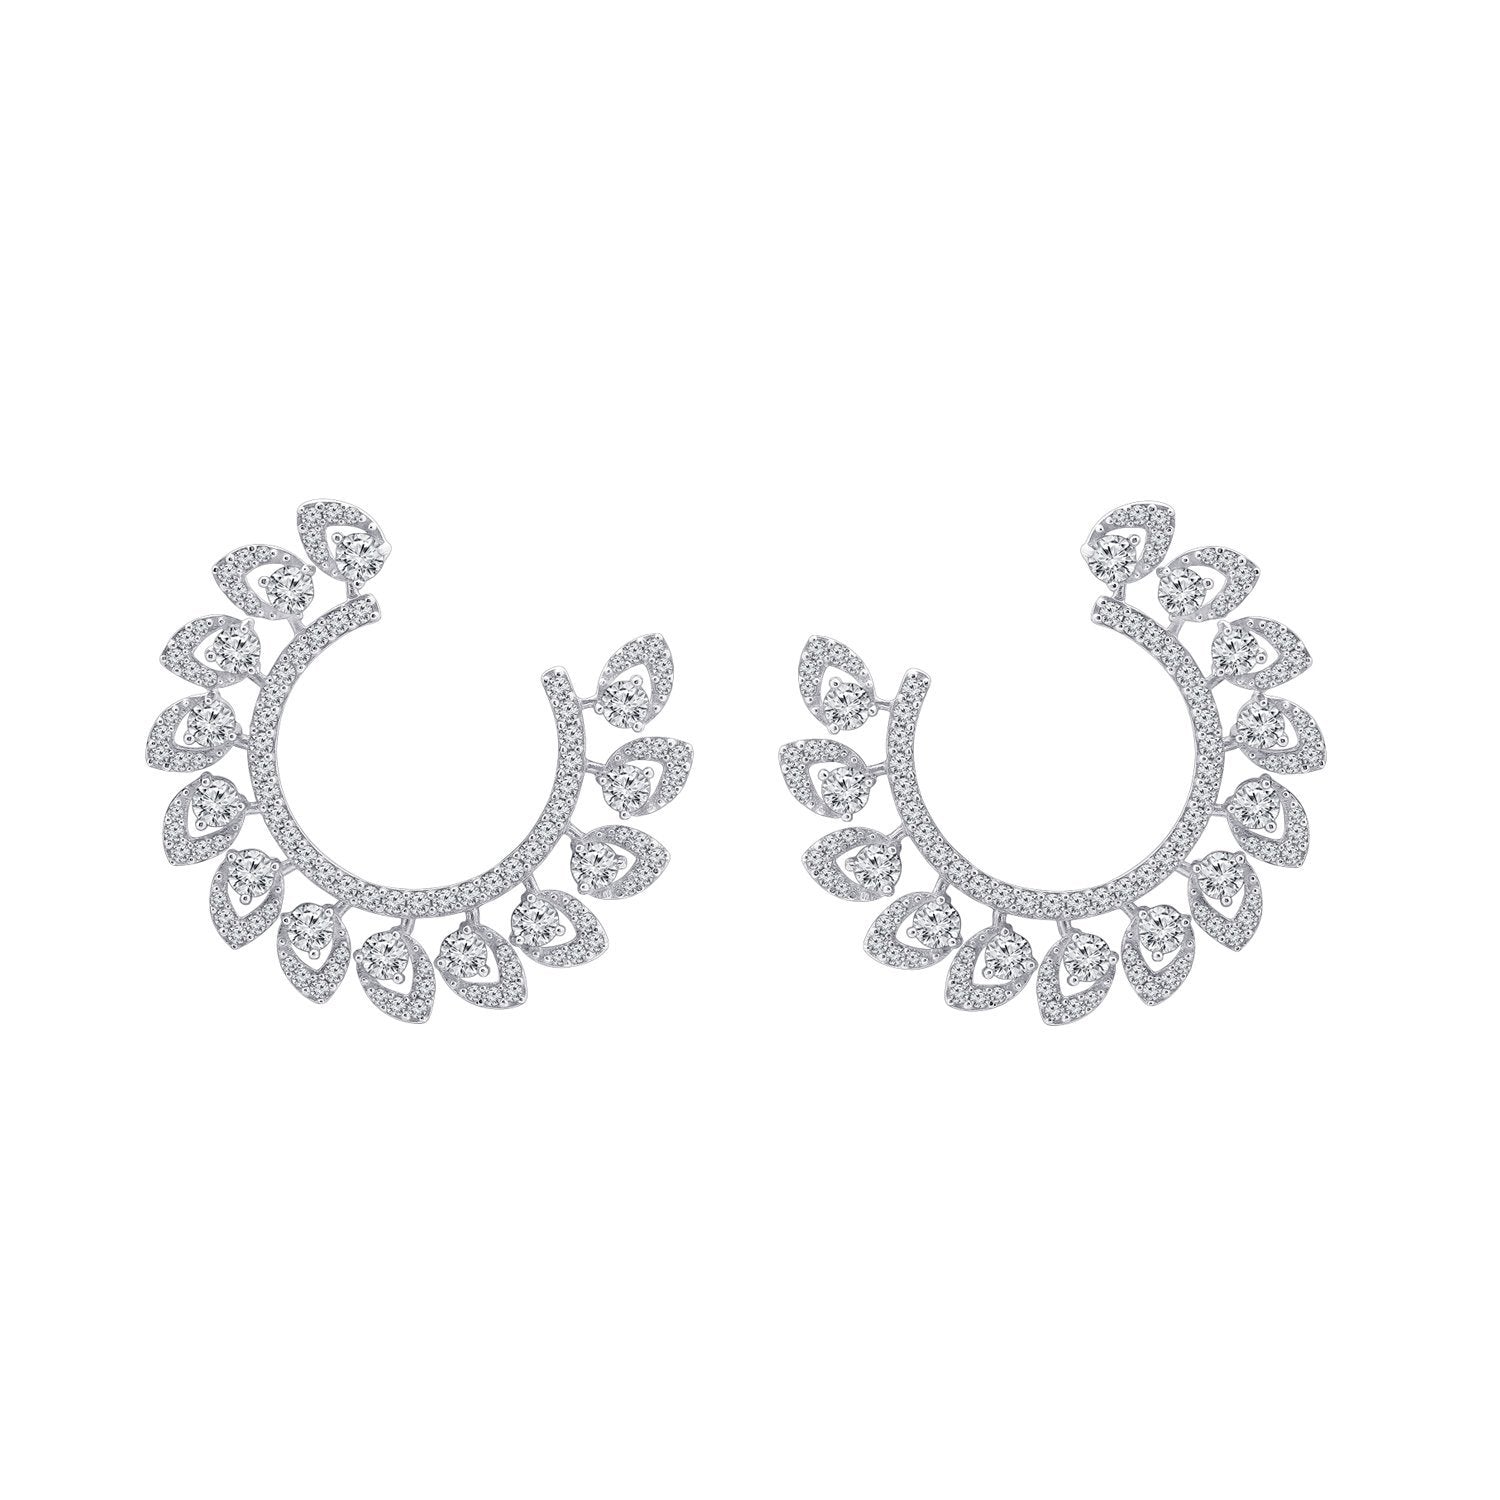 KIERA COUTURE Platinum Clad Sterling Silver 5.3 cttw Cubic Zirconia Wreath Front-Facing Earrings